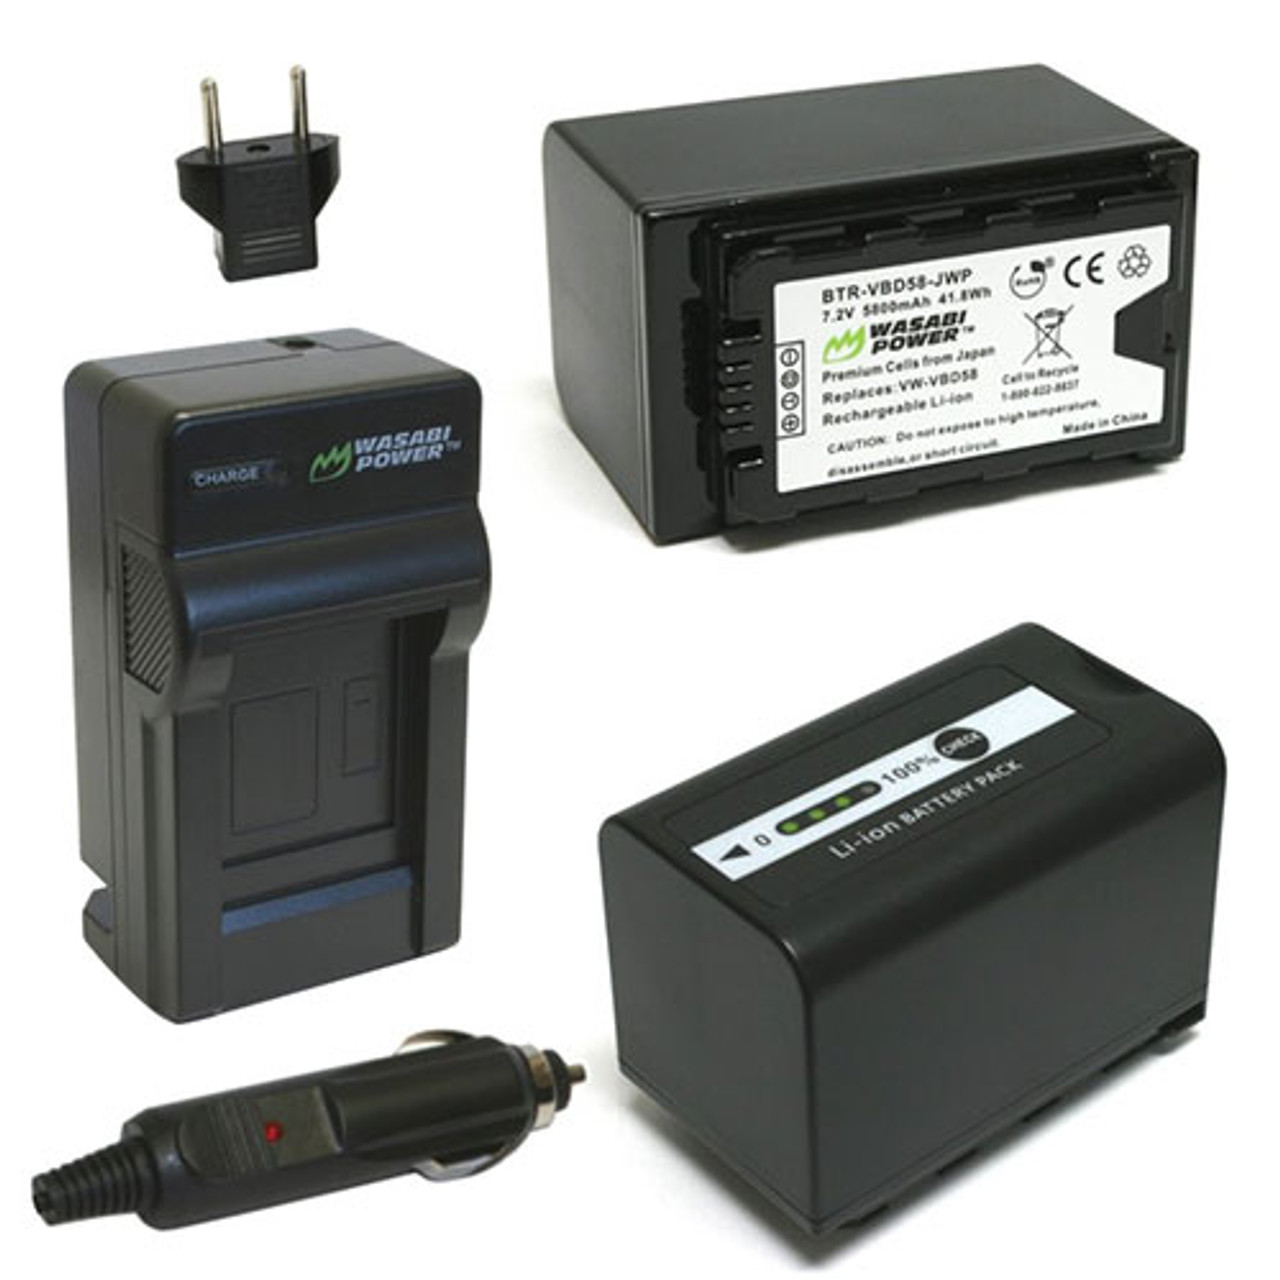 Fantasi Bluebell Uplifted Wasabi Power Panasonic VW-VBD58 and AG-VBR89G Battery with Charger Kit